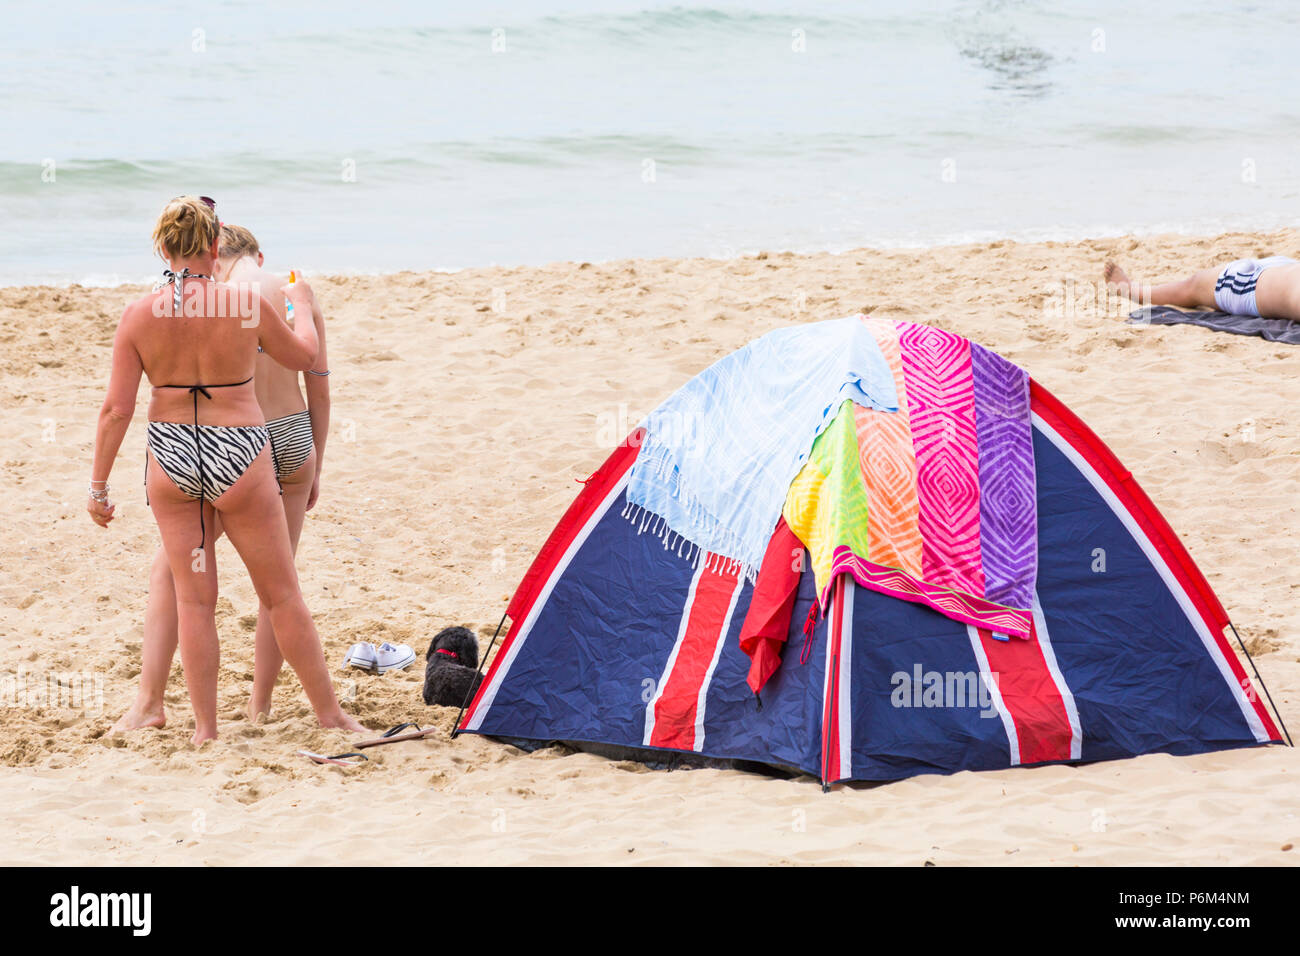 Bournemouth, Dorset, UK. 1st July 2018. UK weather: hazy sunshine, but still warm as thousands of sunseekers head to the beaches at Bournemouth to enjoy a day at the seaside. topping up the suntan lotion cream! Credit: Carolyn Jenkins/Alamy Live News Stock Photo